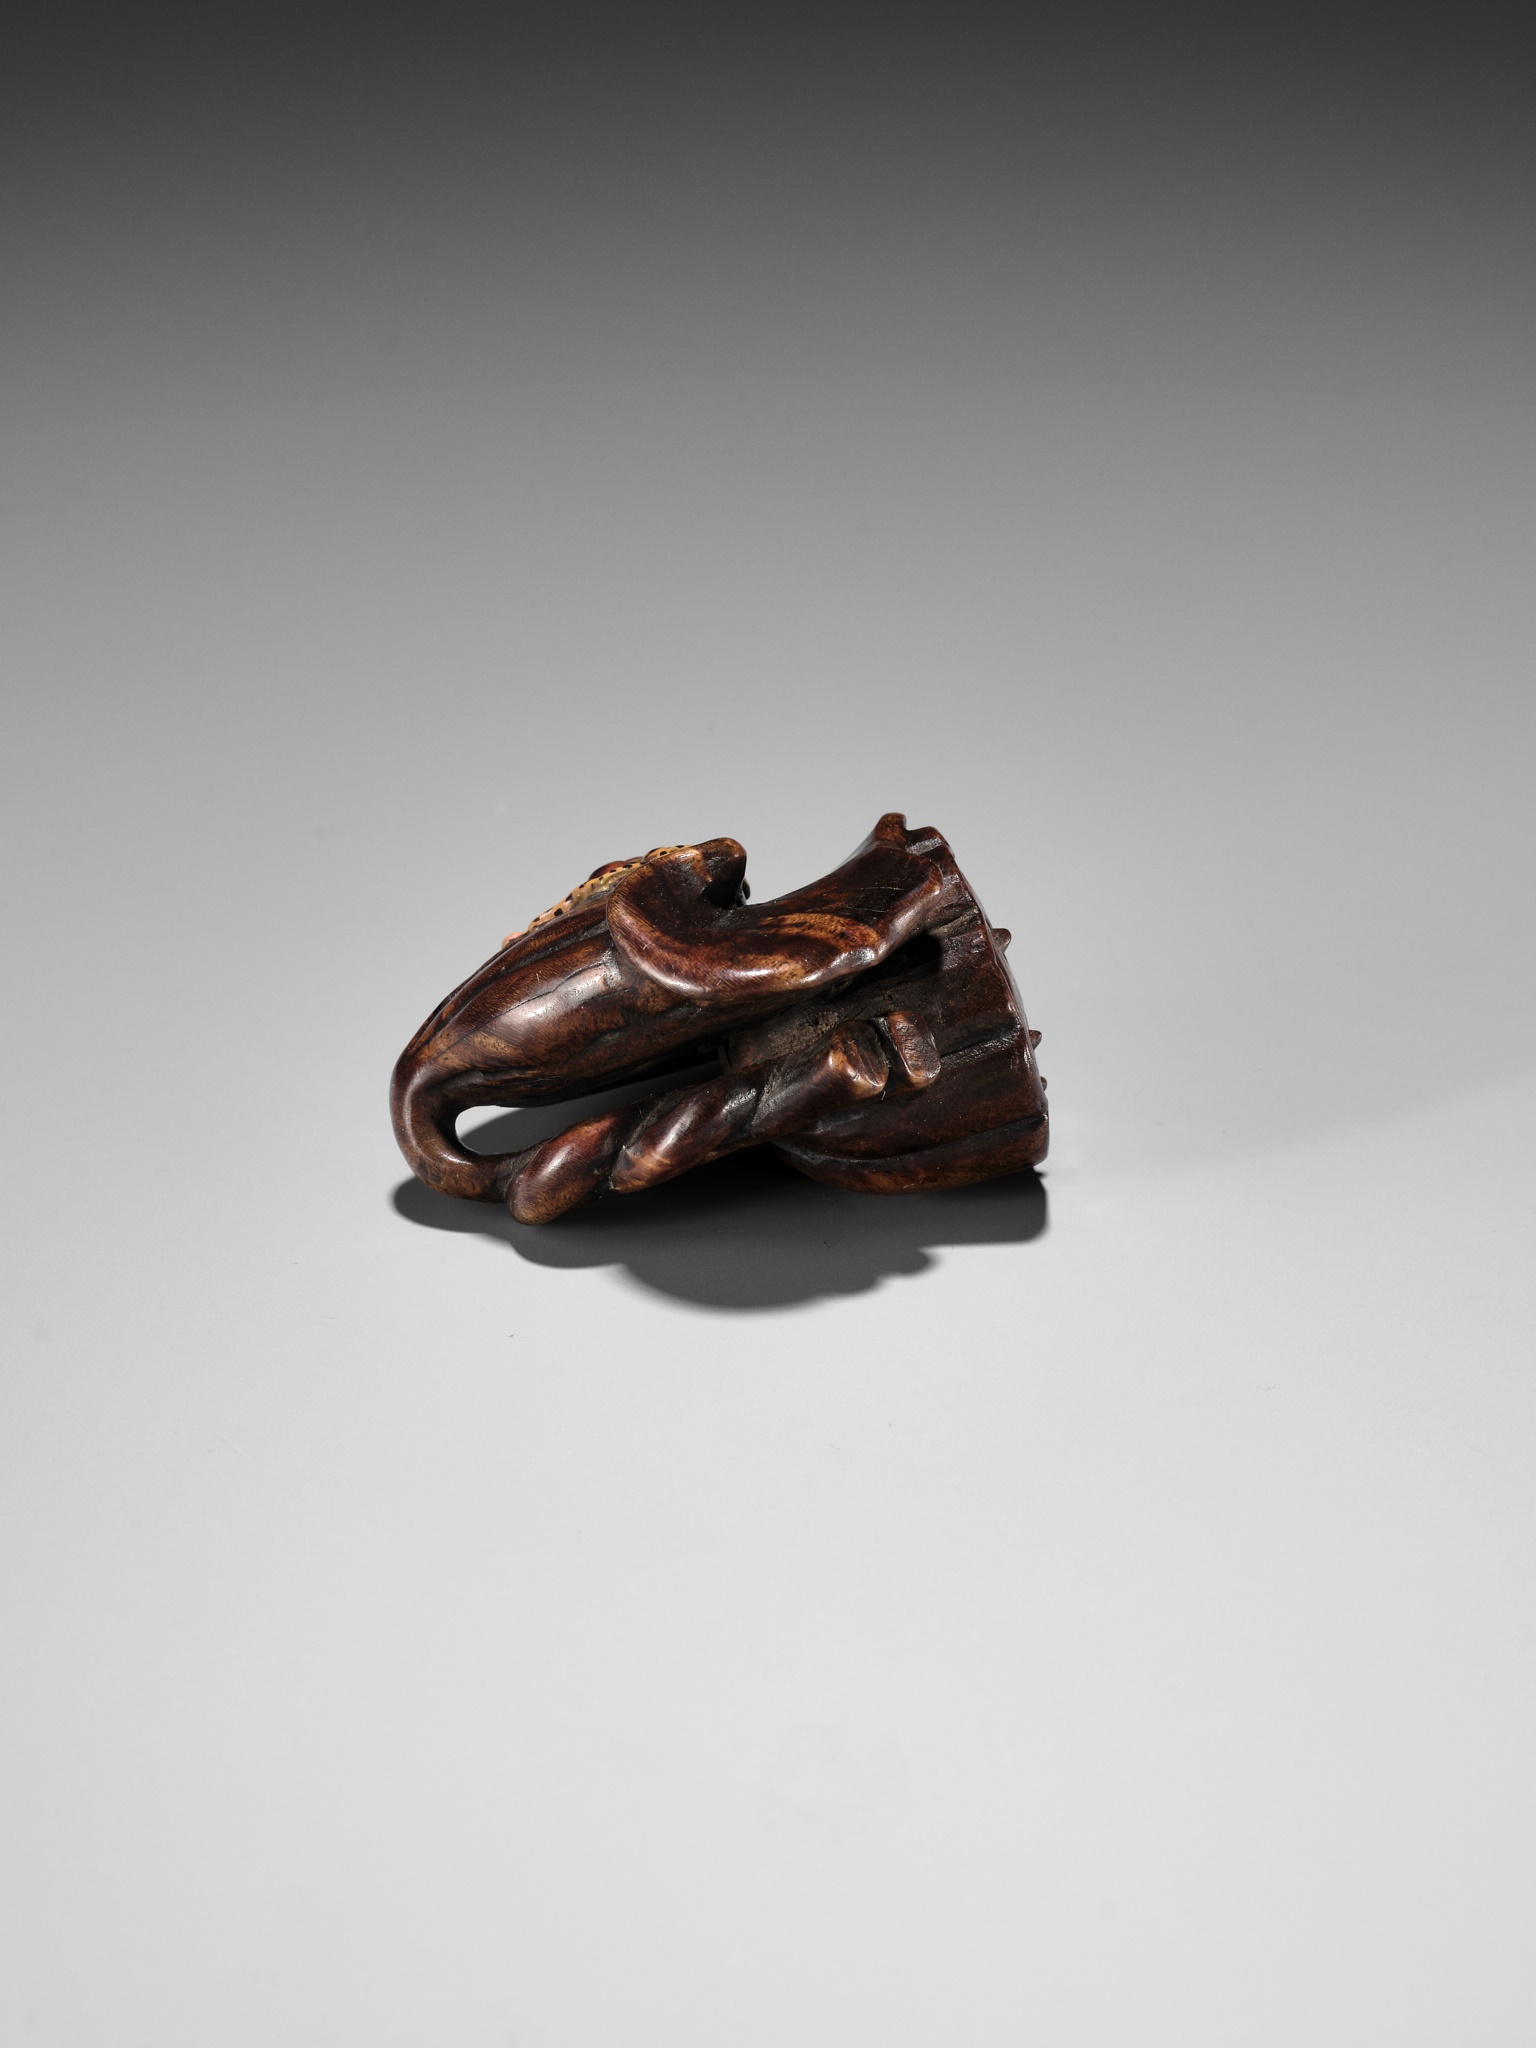 IKKOKUSAI: A RARE TAKAMORIE LACQUERED WOOD NETSUKE OF A WASP AND LOTUS - Image 7 of 7